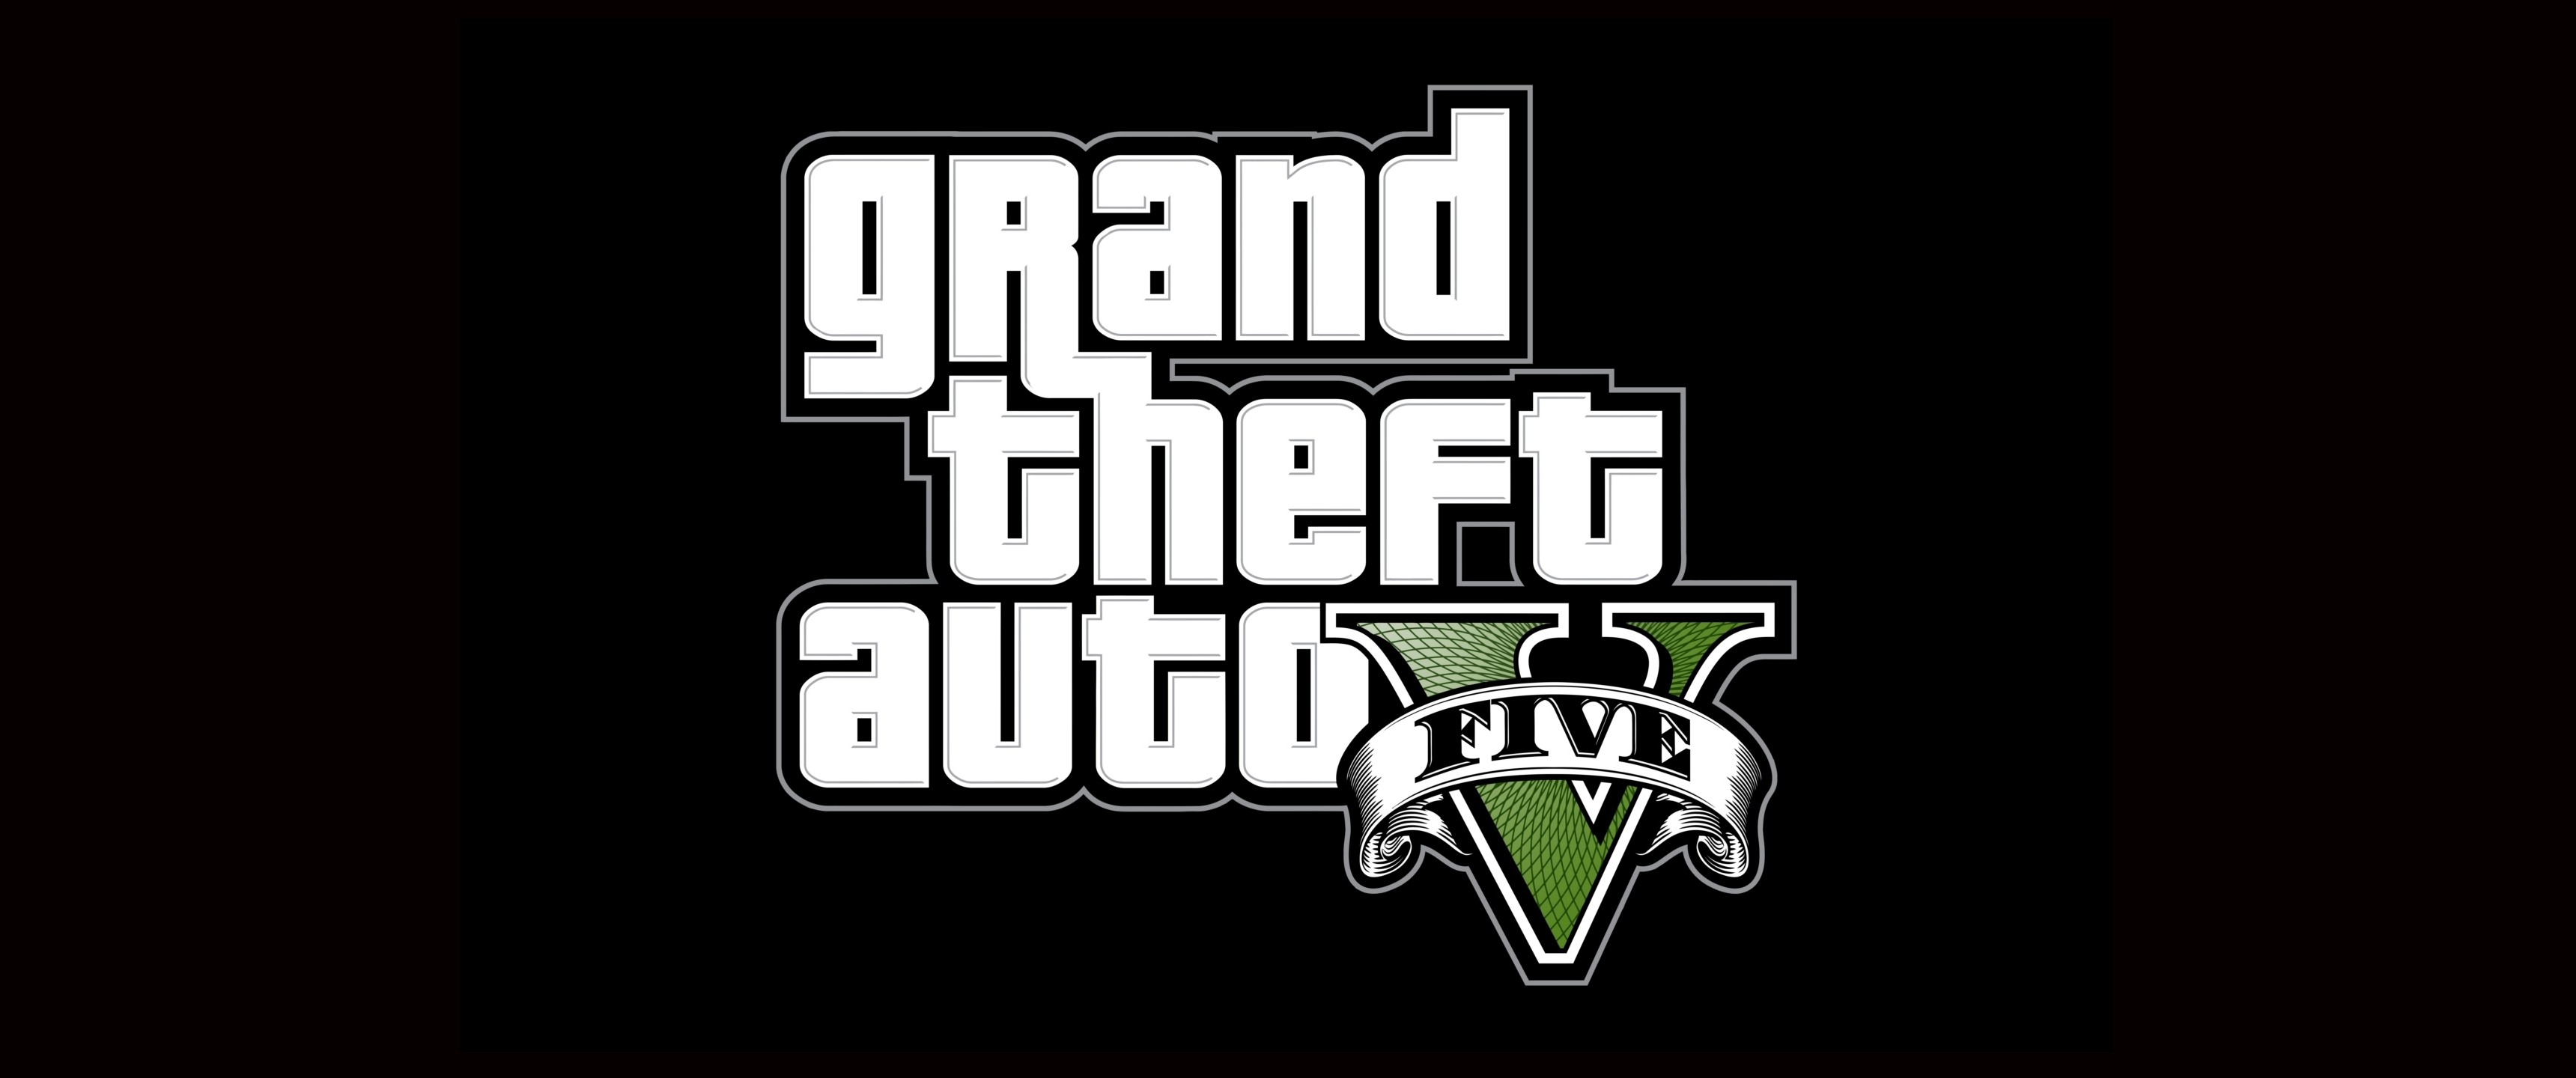 General 3440x1440 Grand Theft Auto V video games Grand Theft Auto PC gaming logo black background simple background